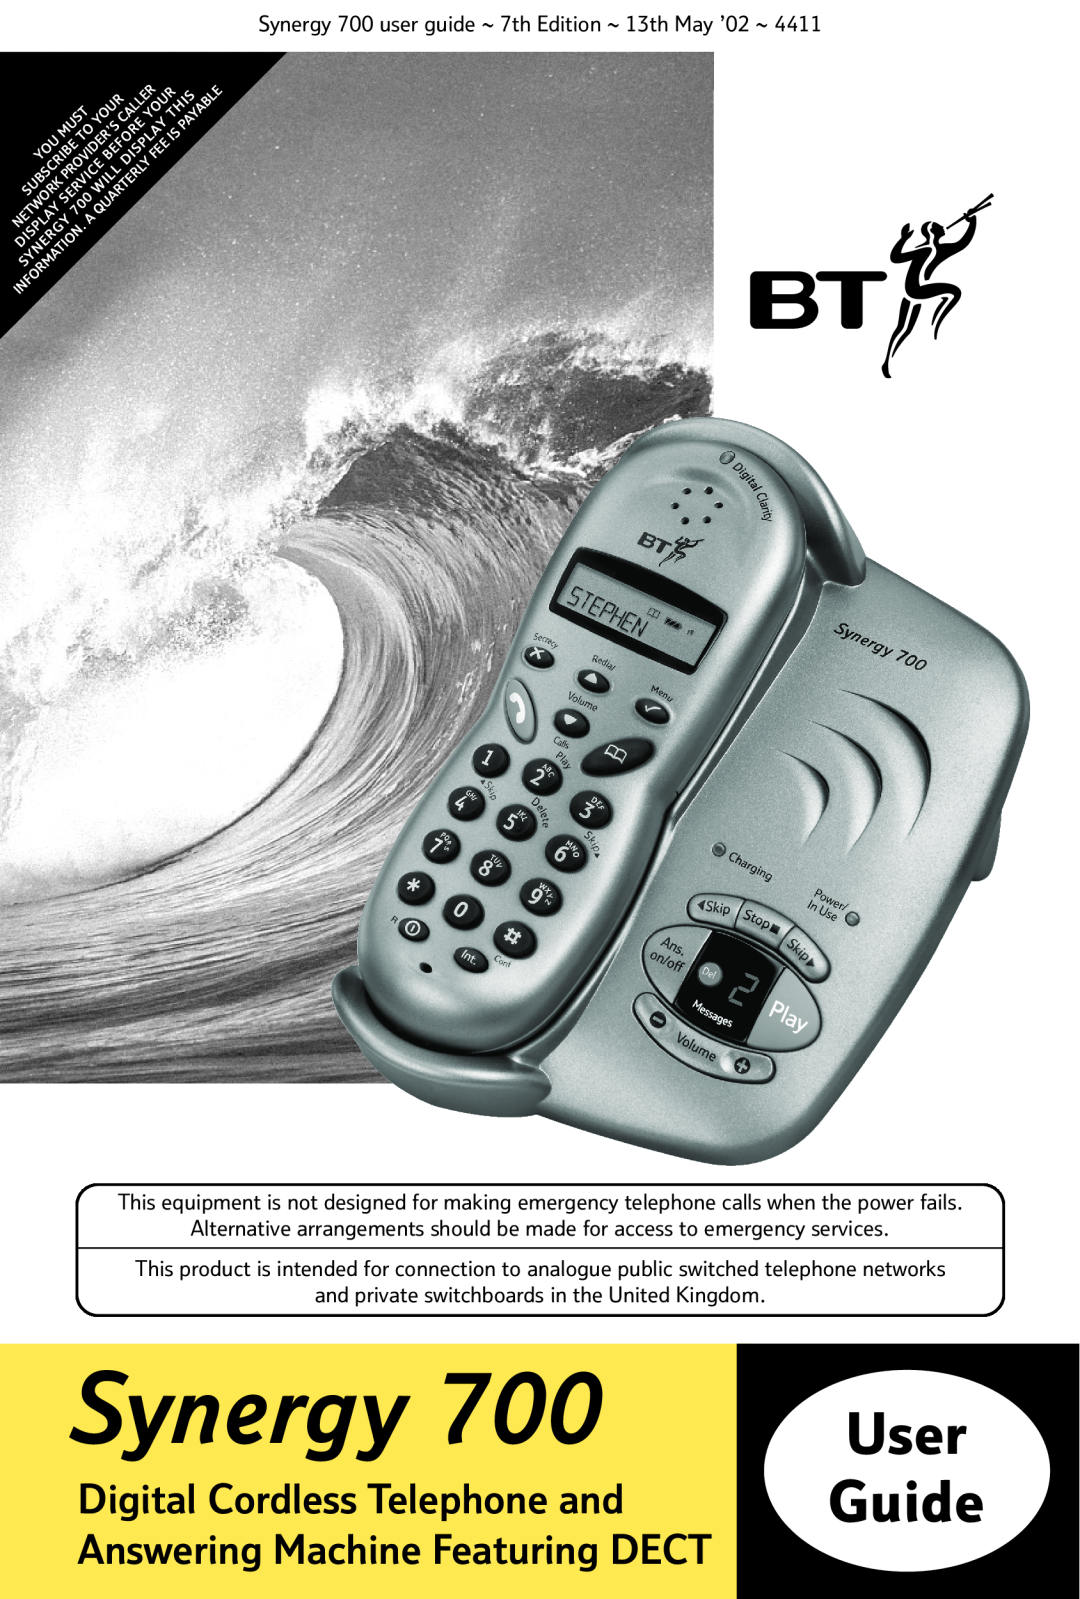 BT Synergy 700 manual Guide, User, Digital Cordless Telephone and, Answering Machine Featuring DECT 